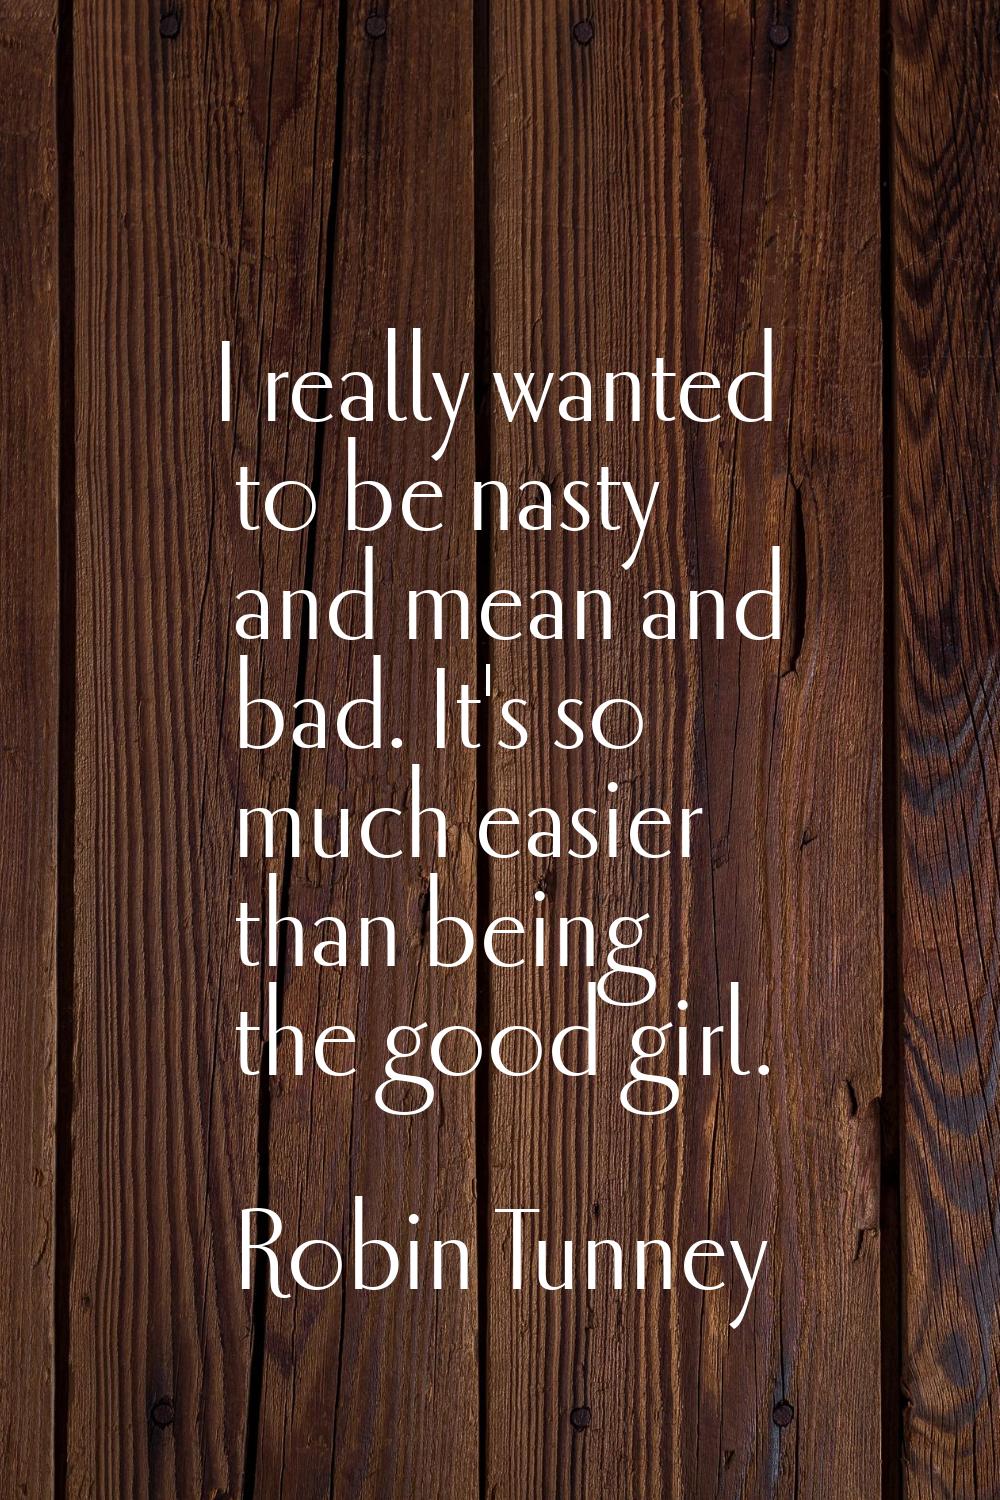 I really wanted to be nasty and mean and bad. It's so much easier than being the good girl.